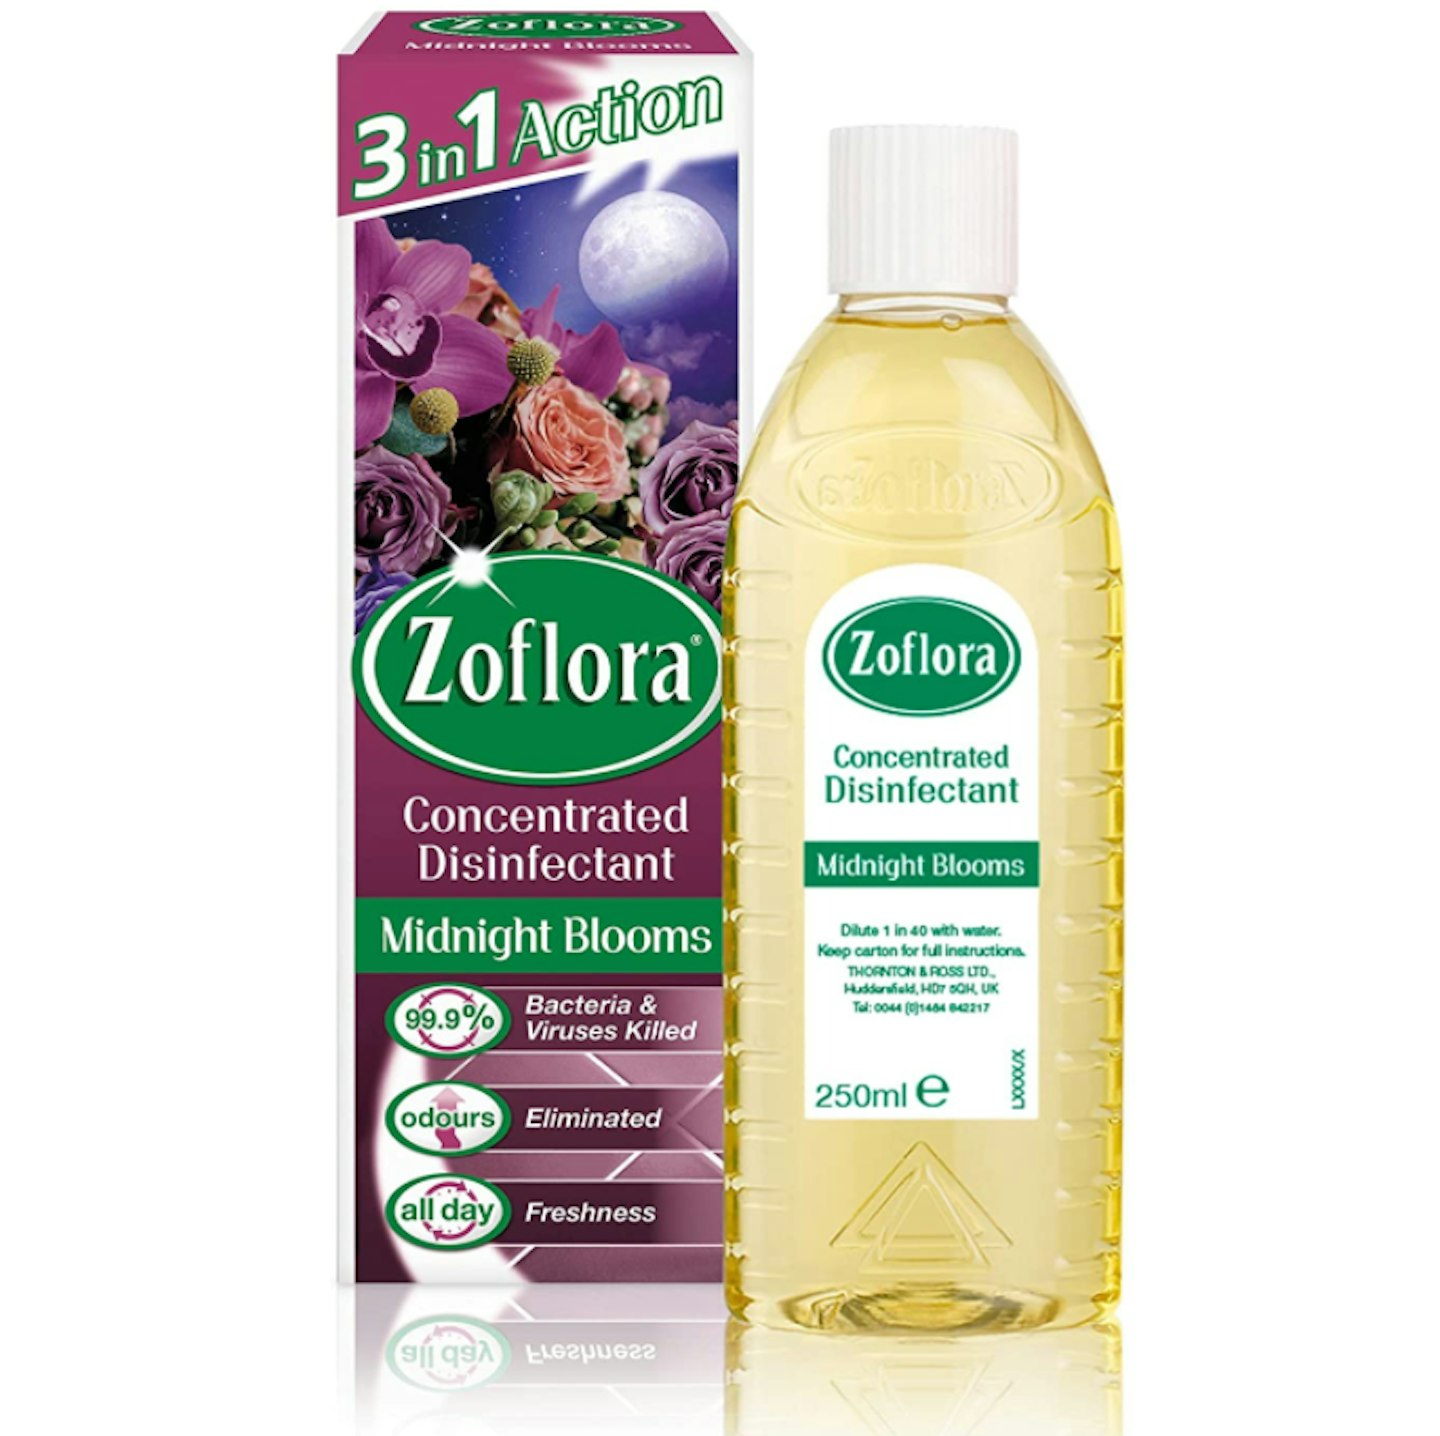 Zoflora concentrated disinfectant